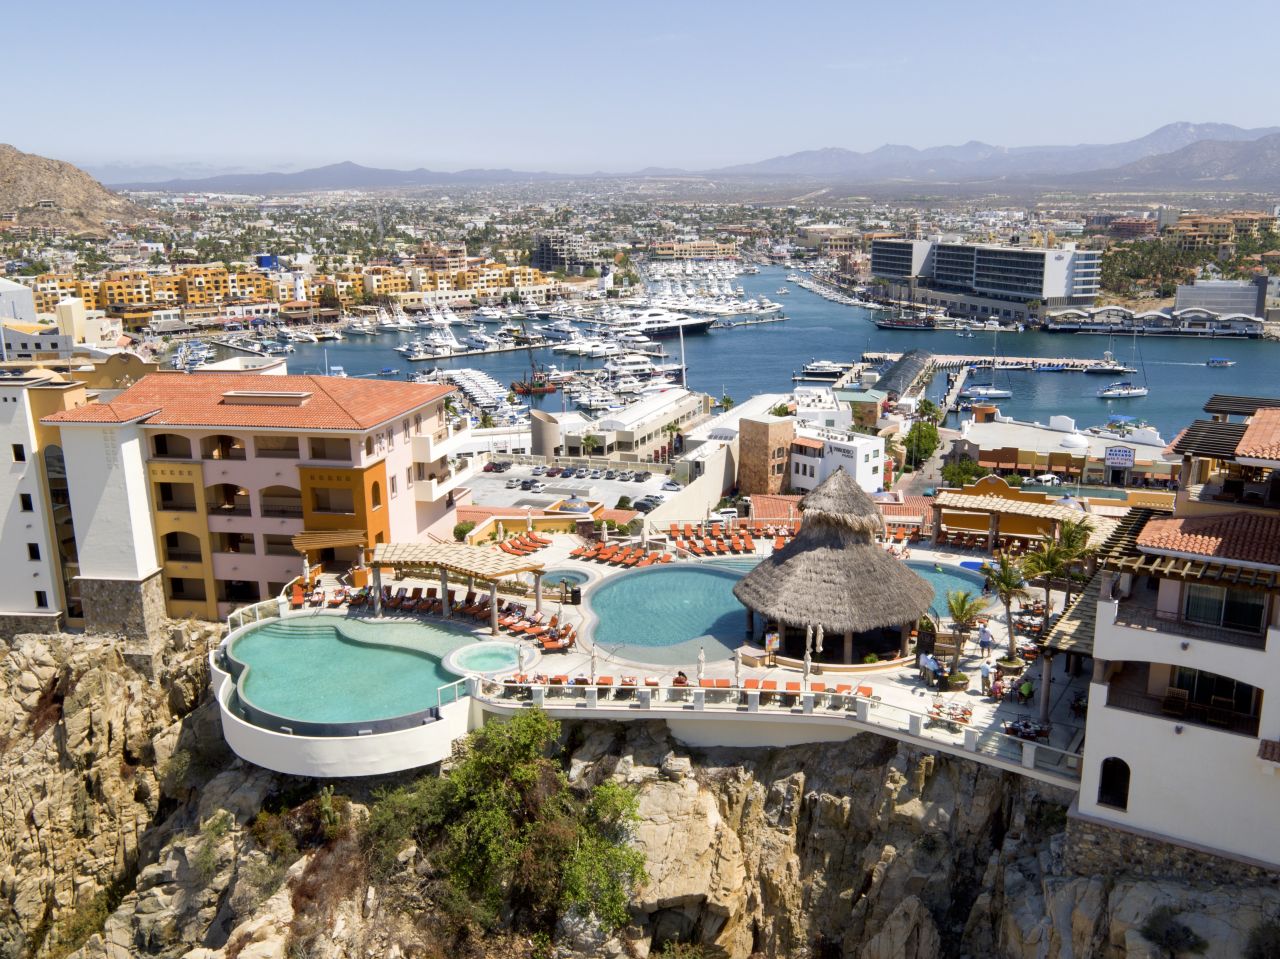 Playa Grande Resort in Los Cabos offers Pacific views and pools with swim-up bars.